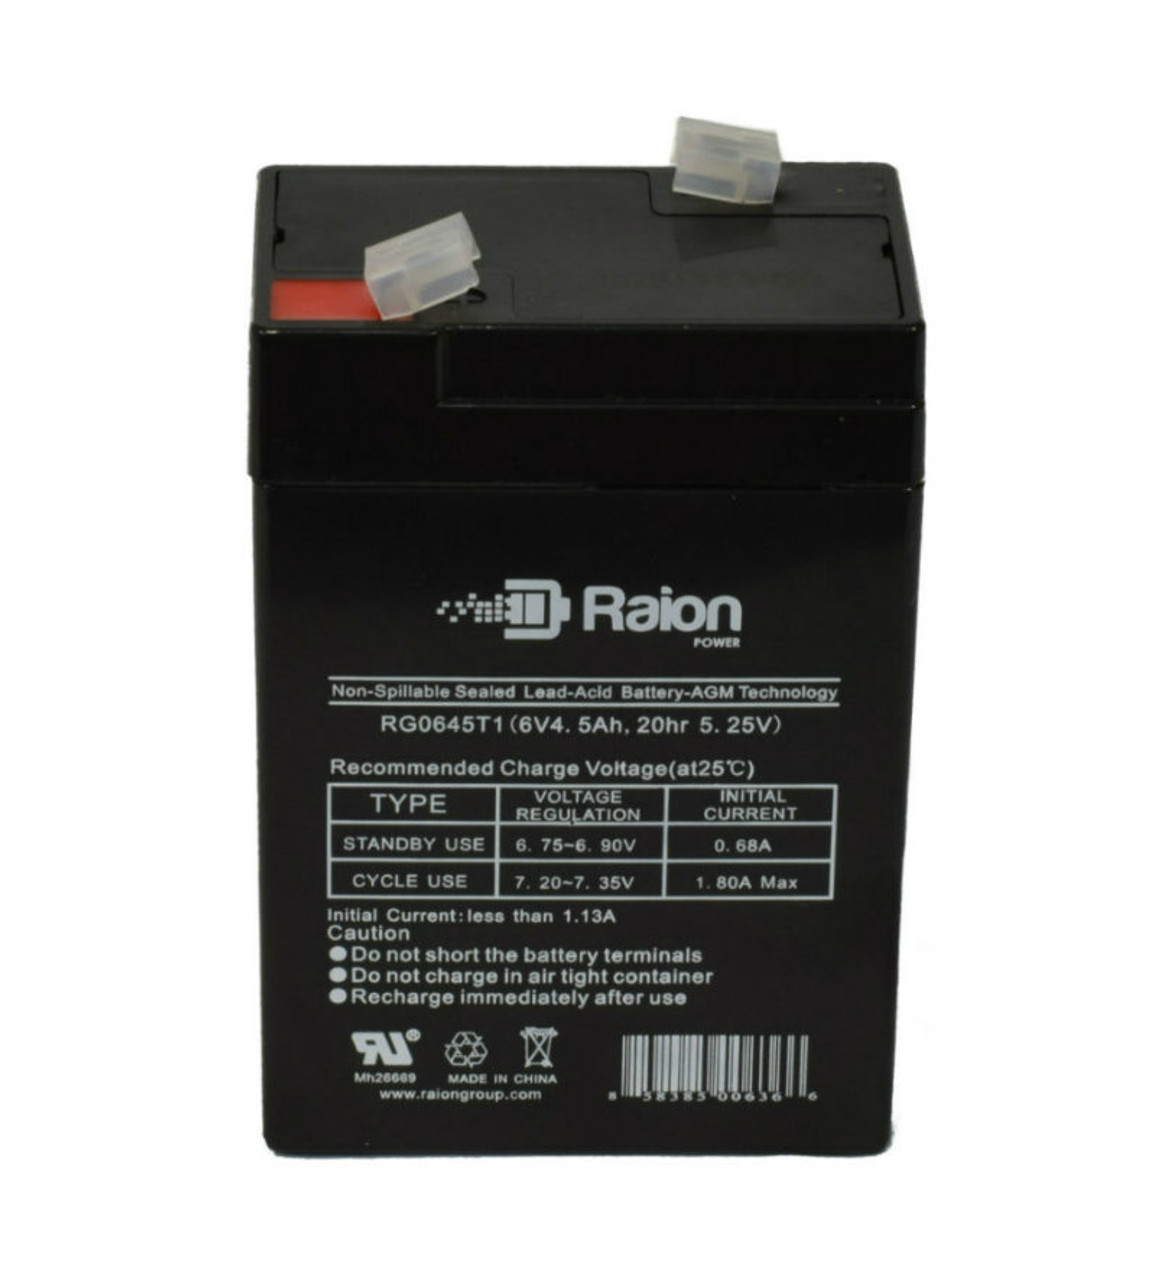 Raion Power RG0645T1 Replacement Battery Cartridge for Yuntong YT-640A